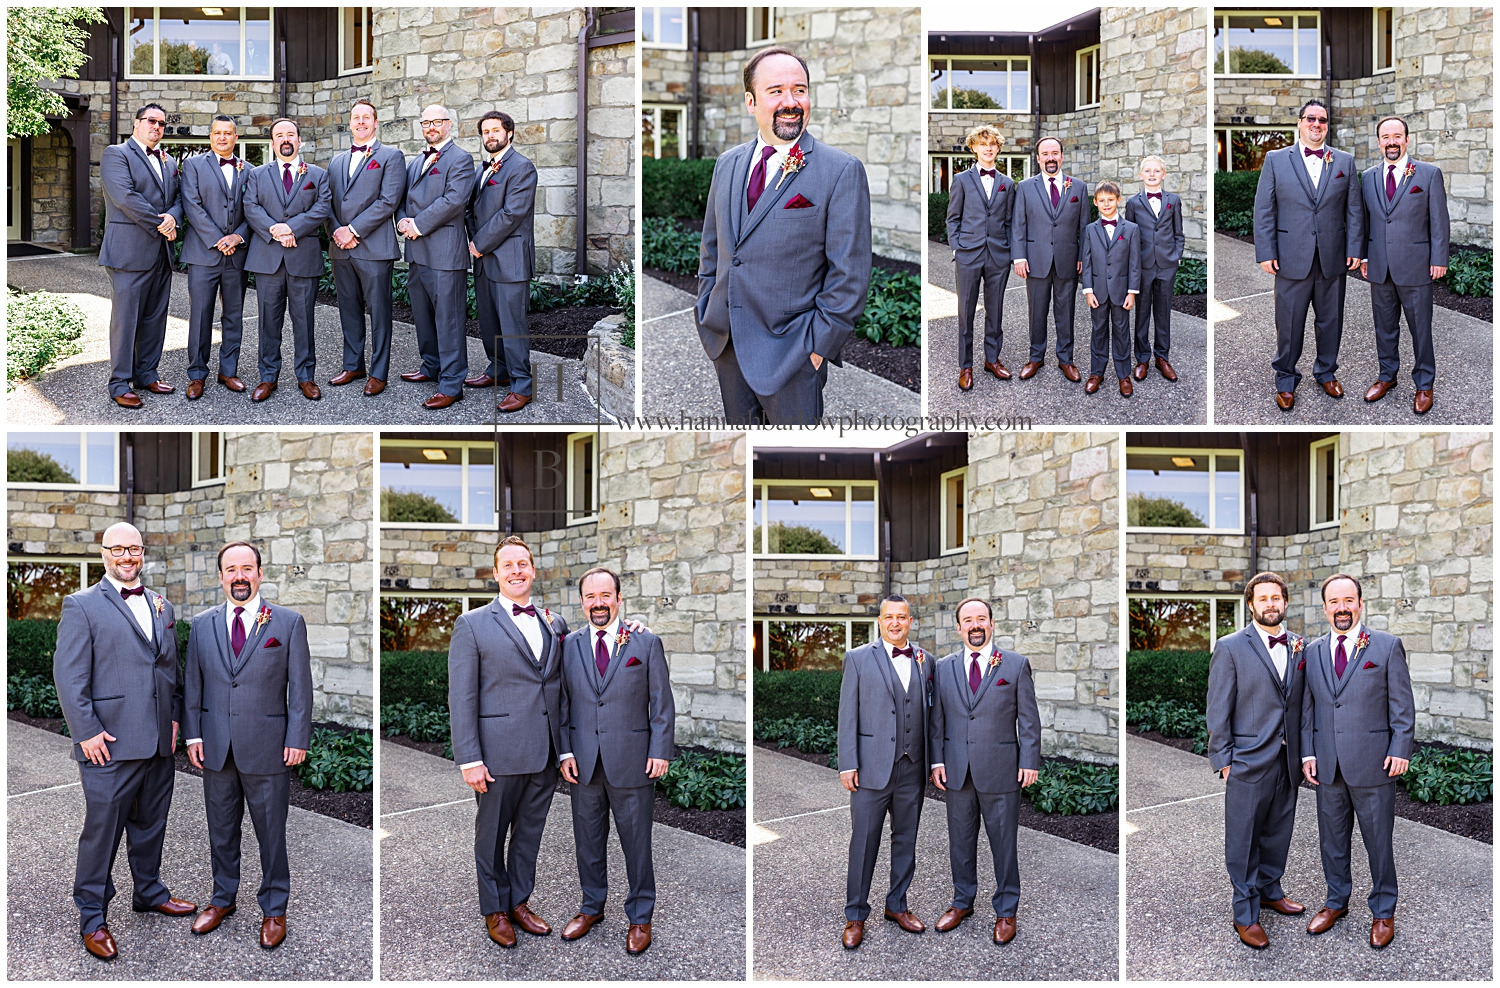 Collage of groom and groomsmen pose for photos in grey tuxes.